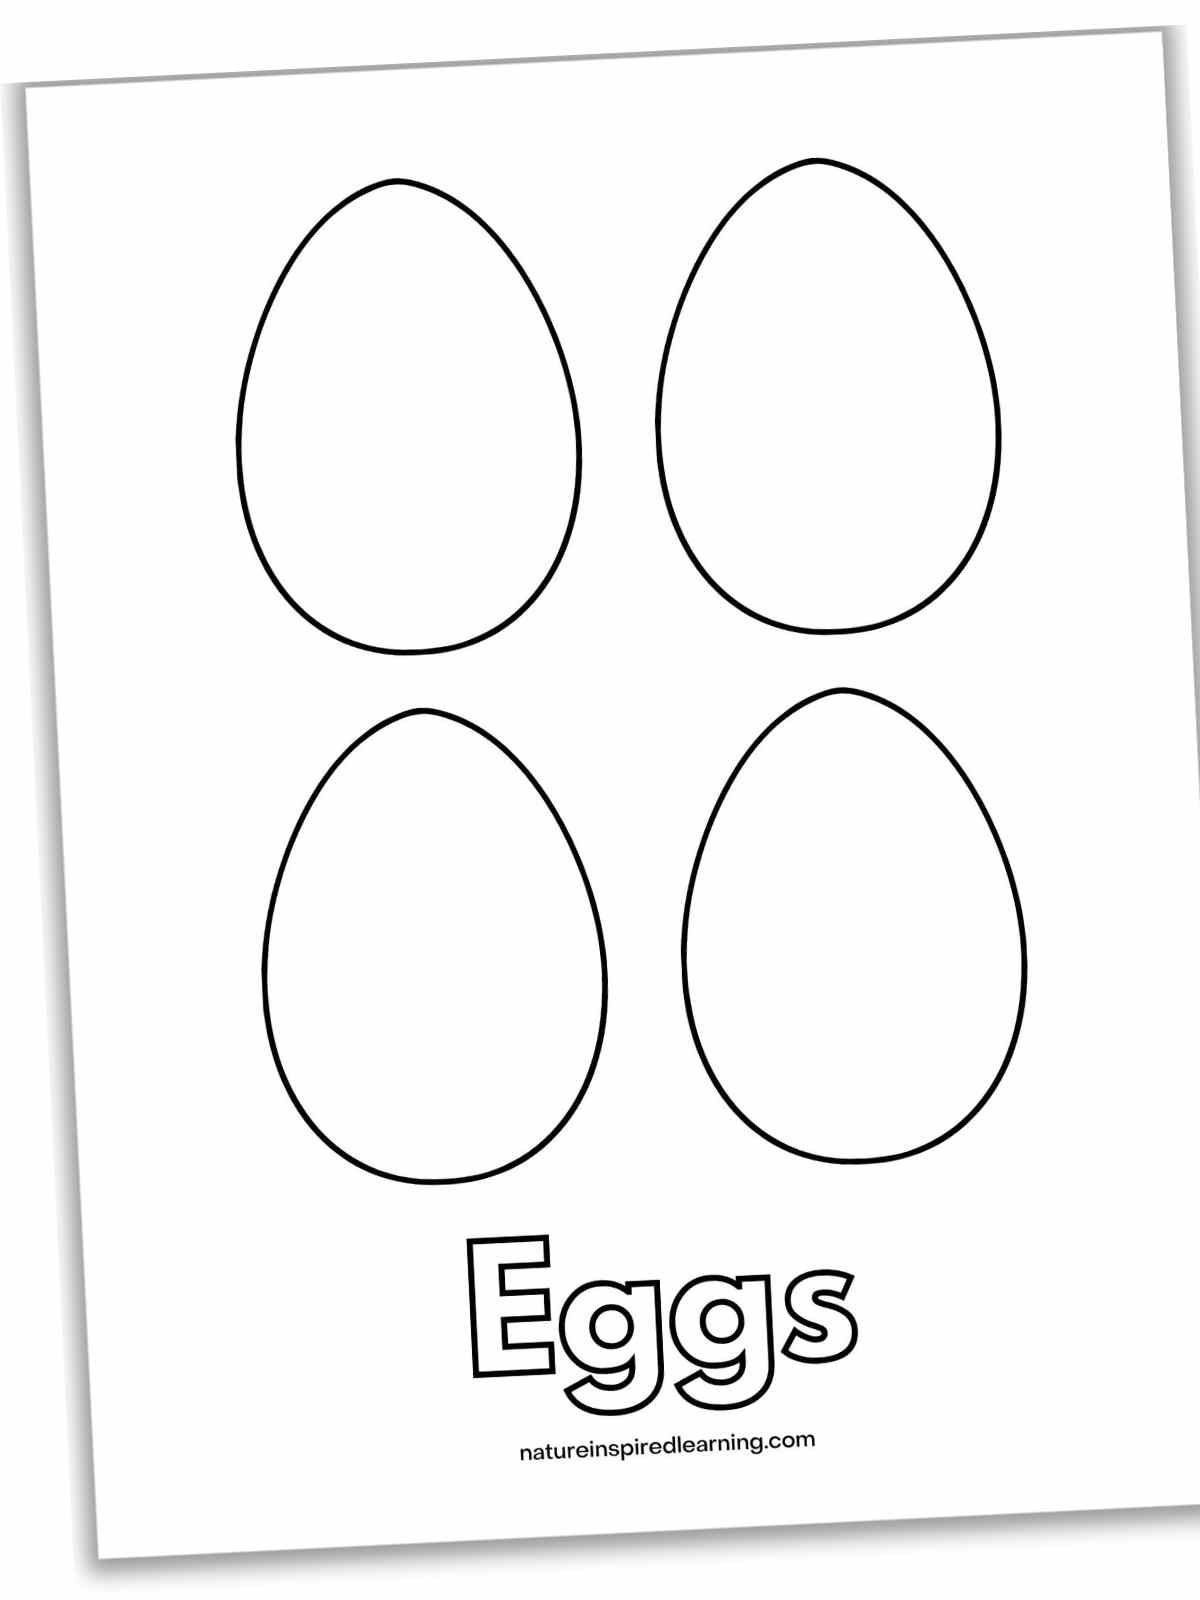 four eggs arranged in two rows of two with the word Eggs below in outline form